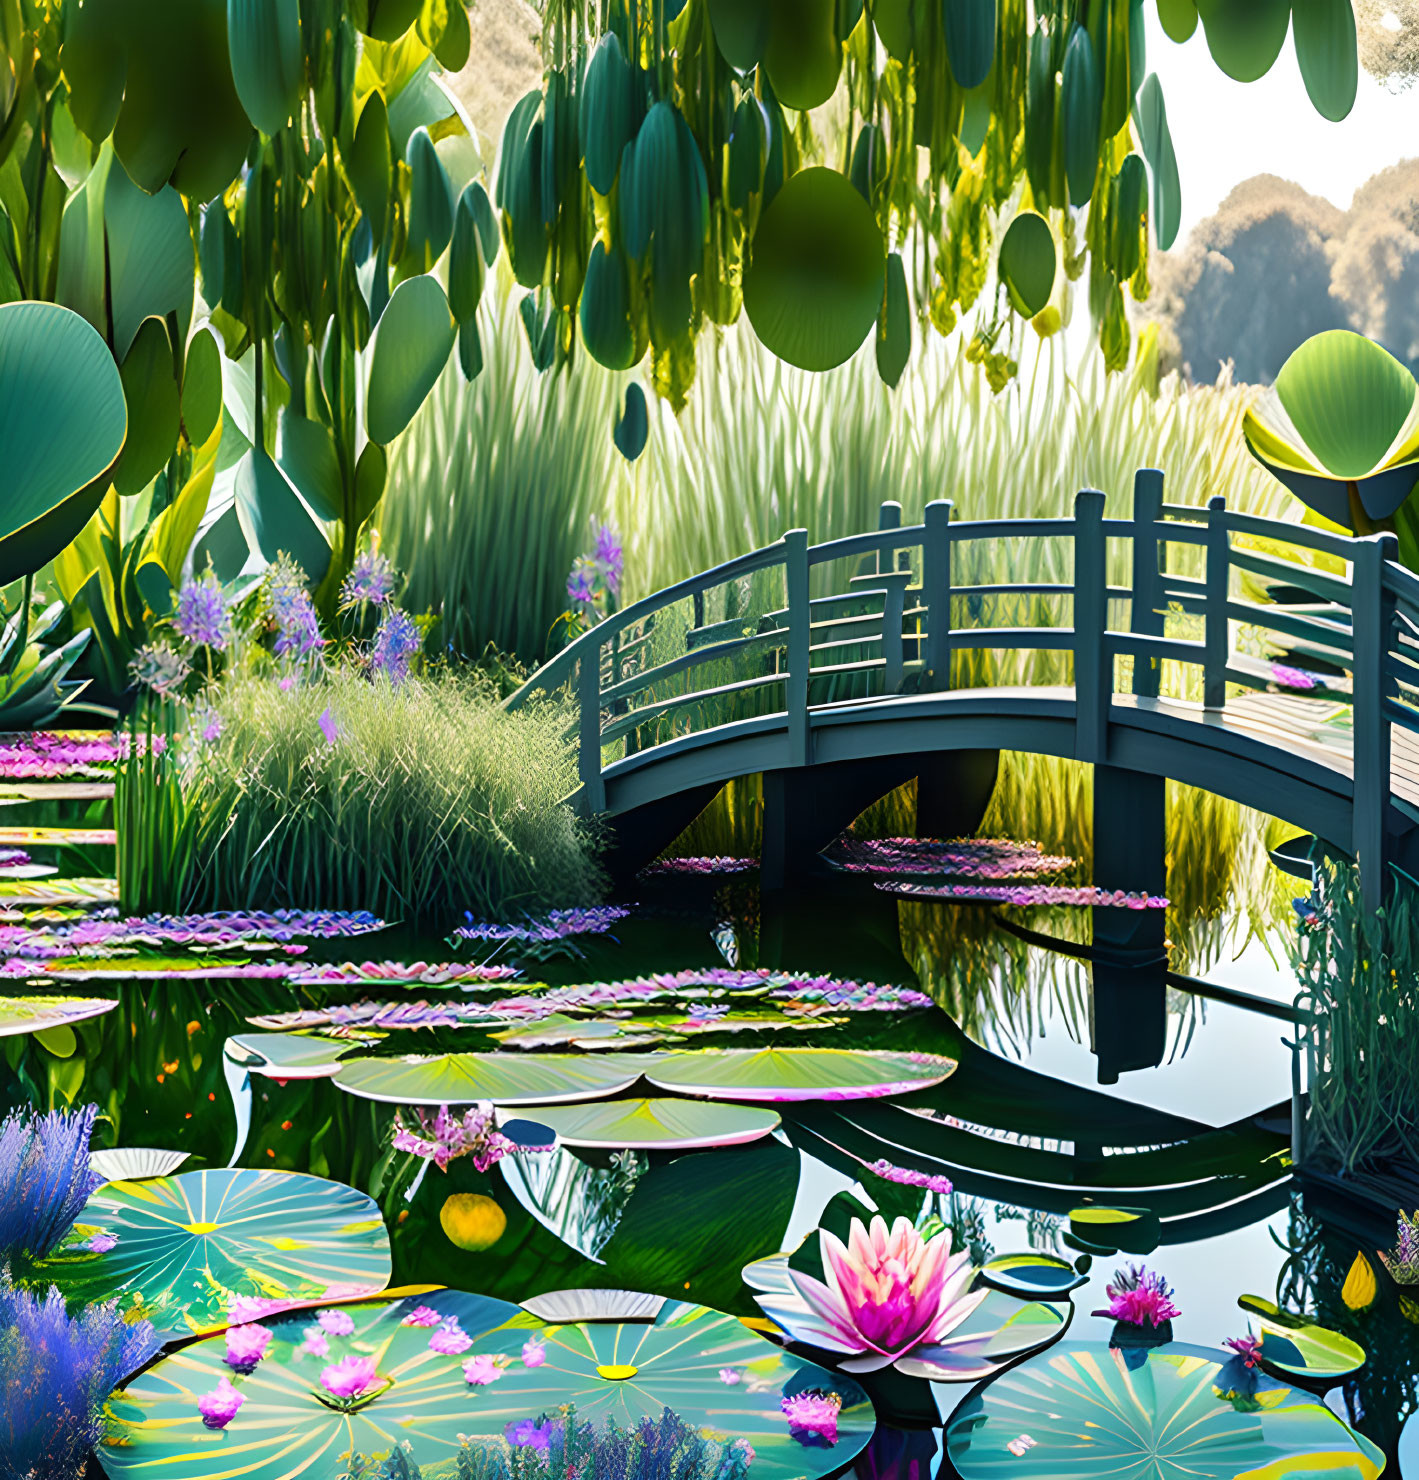 Tranquil pond with vibrant water lilies and lotus flowers in lush greenery